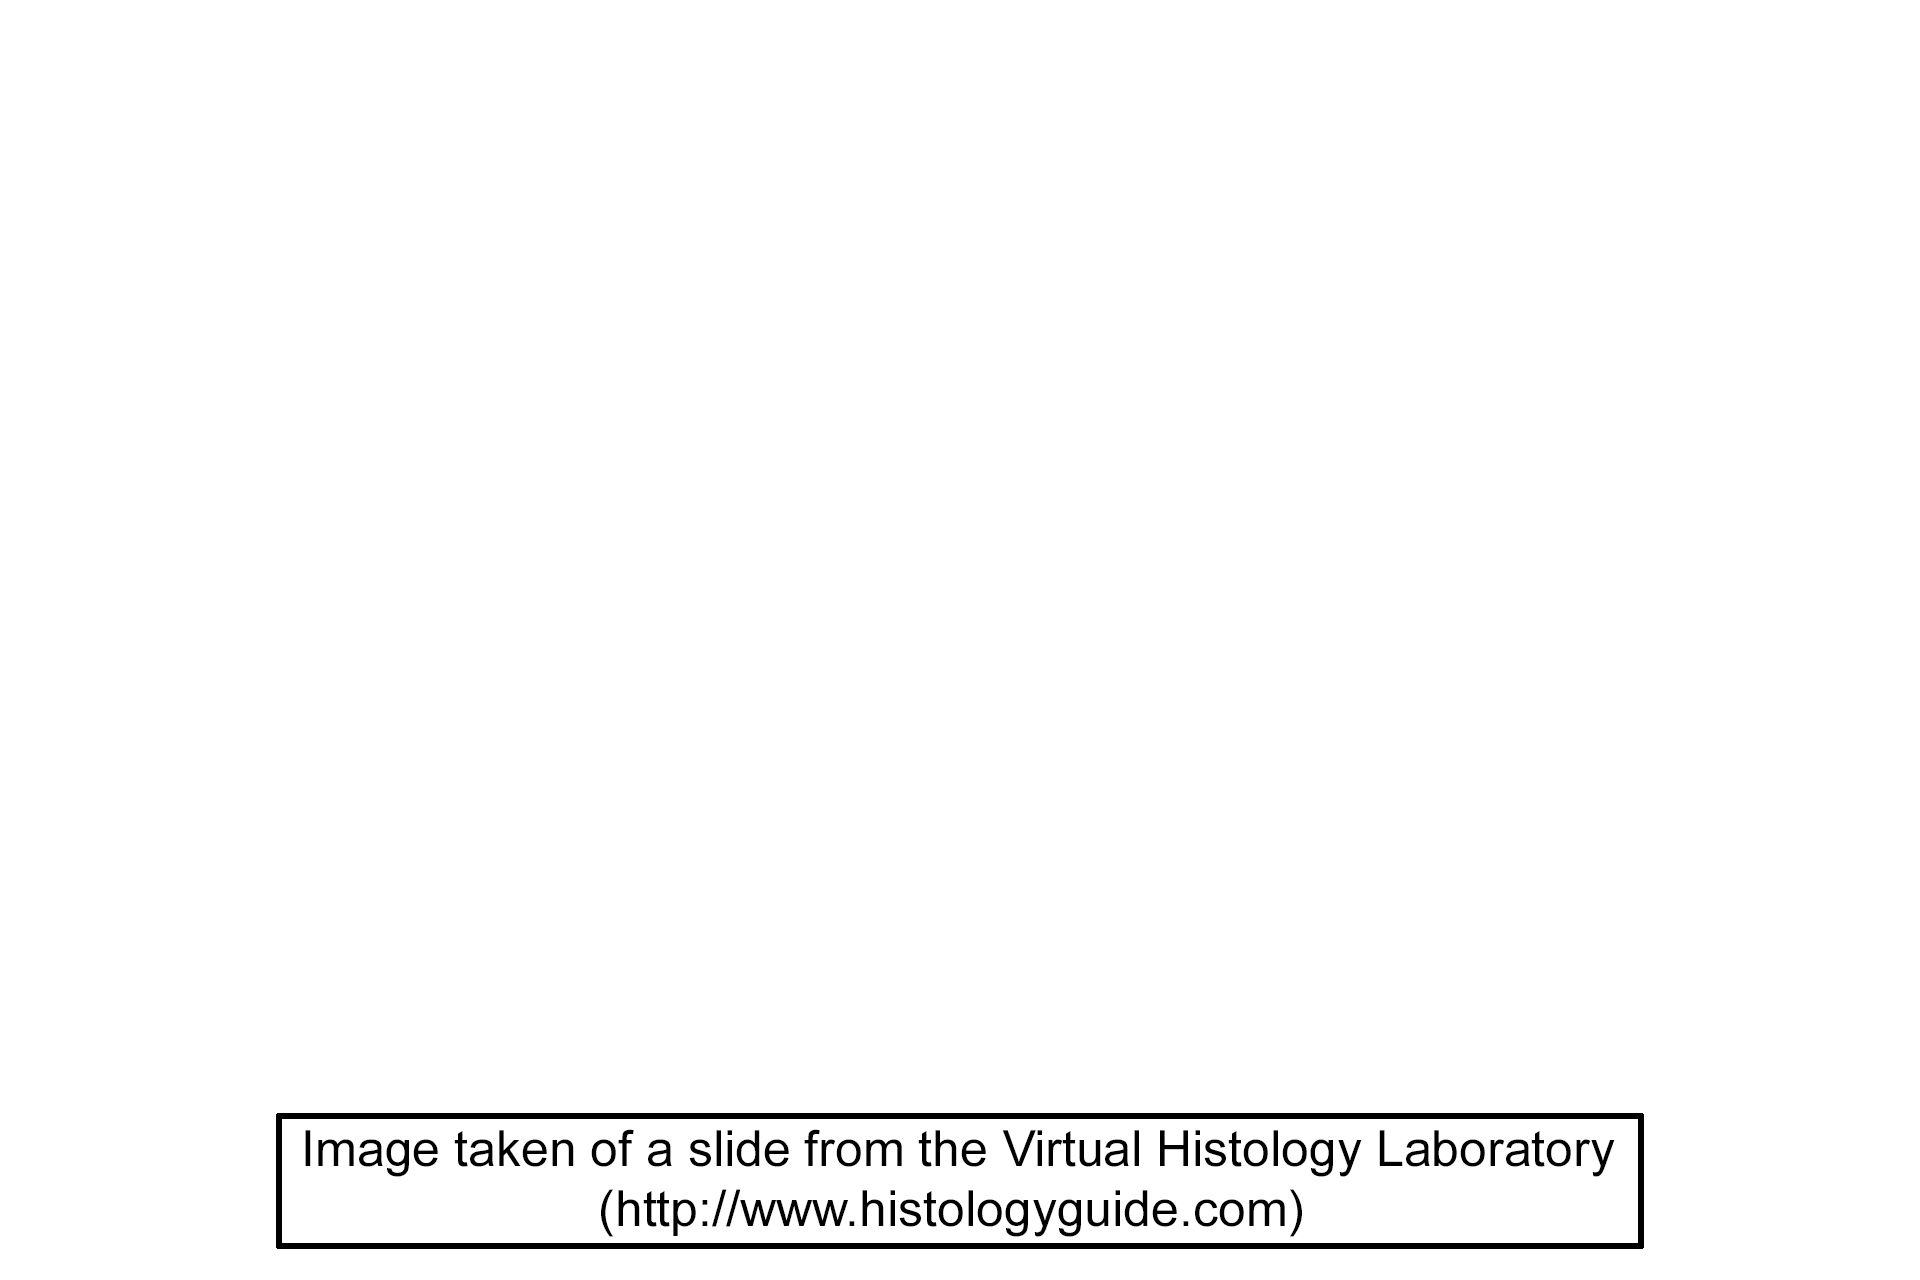 Image source > <p>This image was taken of a slide on the Virtual Microscopy Laboratory website (www.histologyguide.com).</p>
